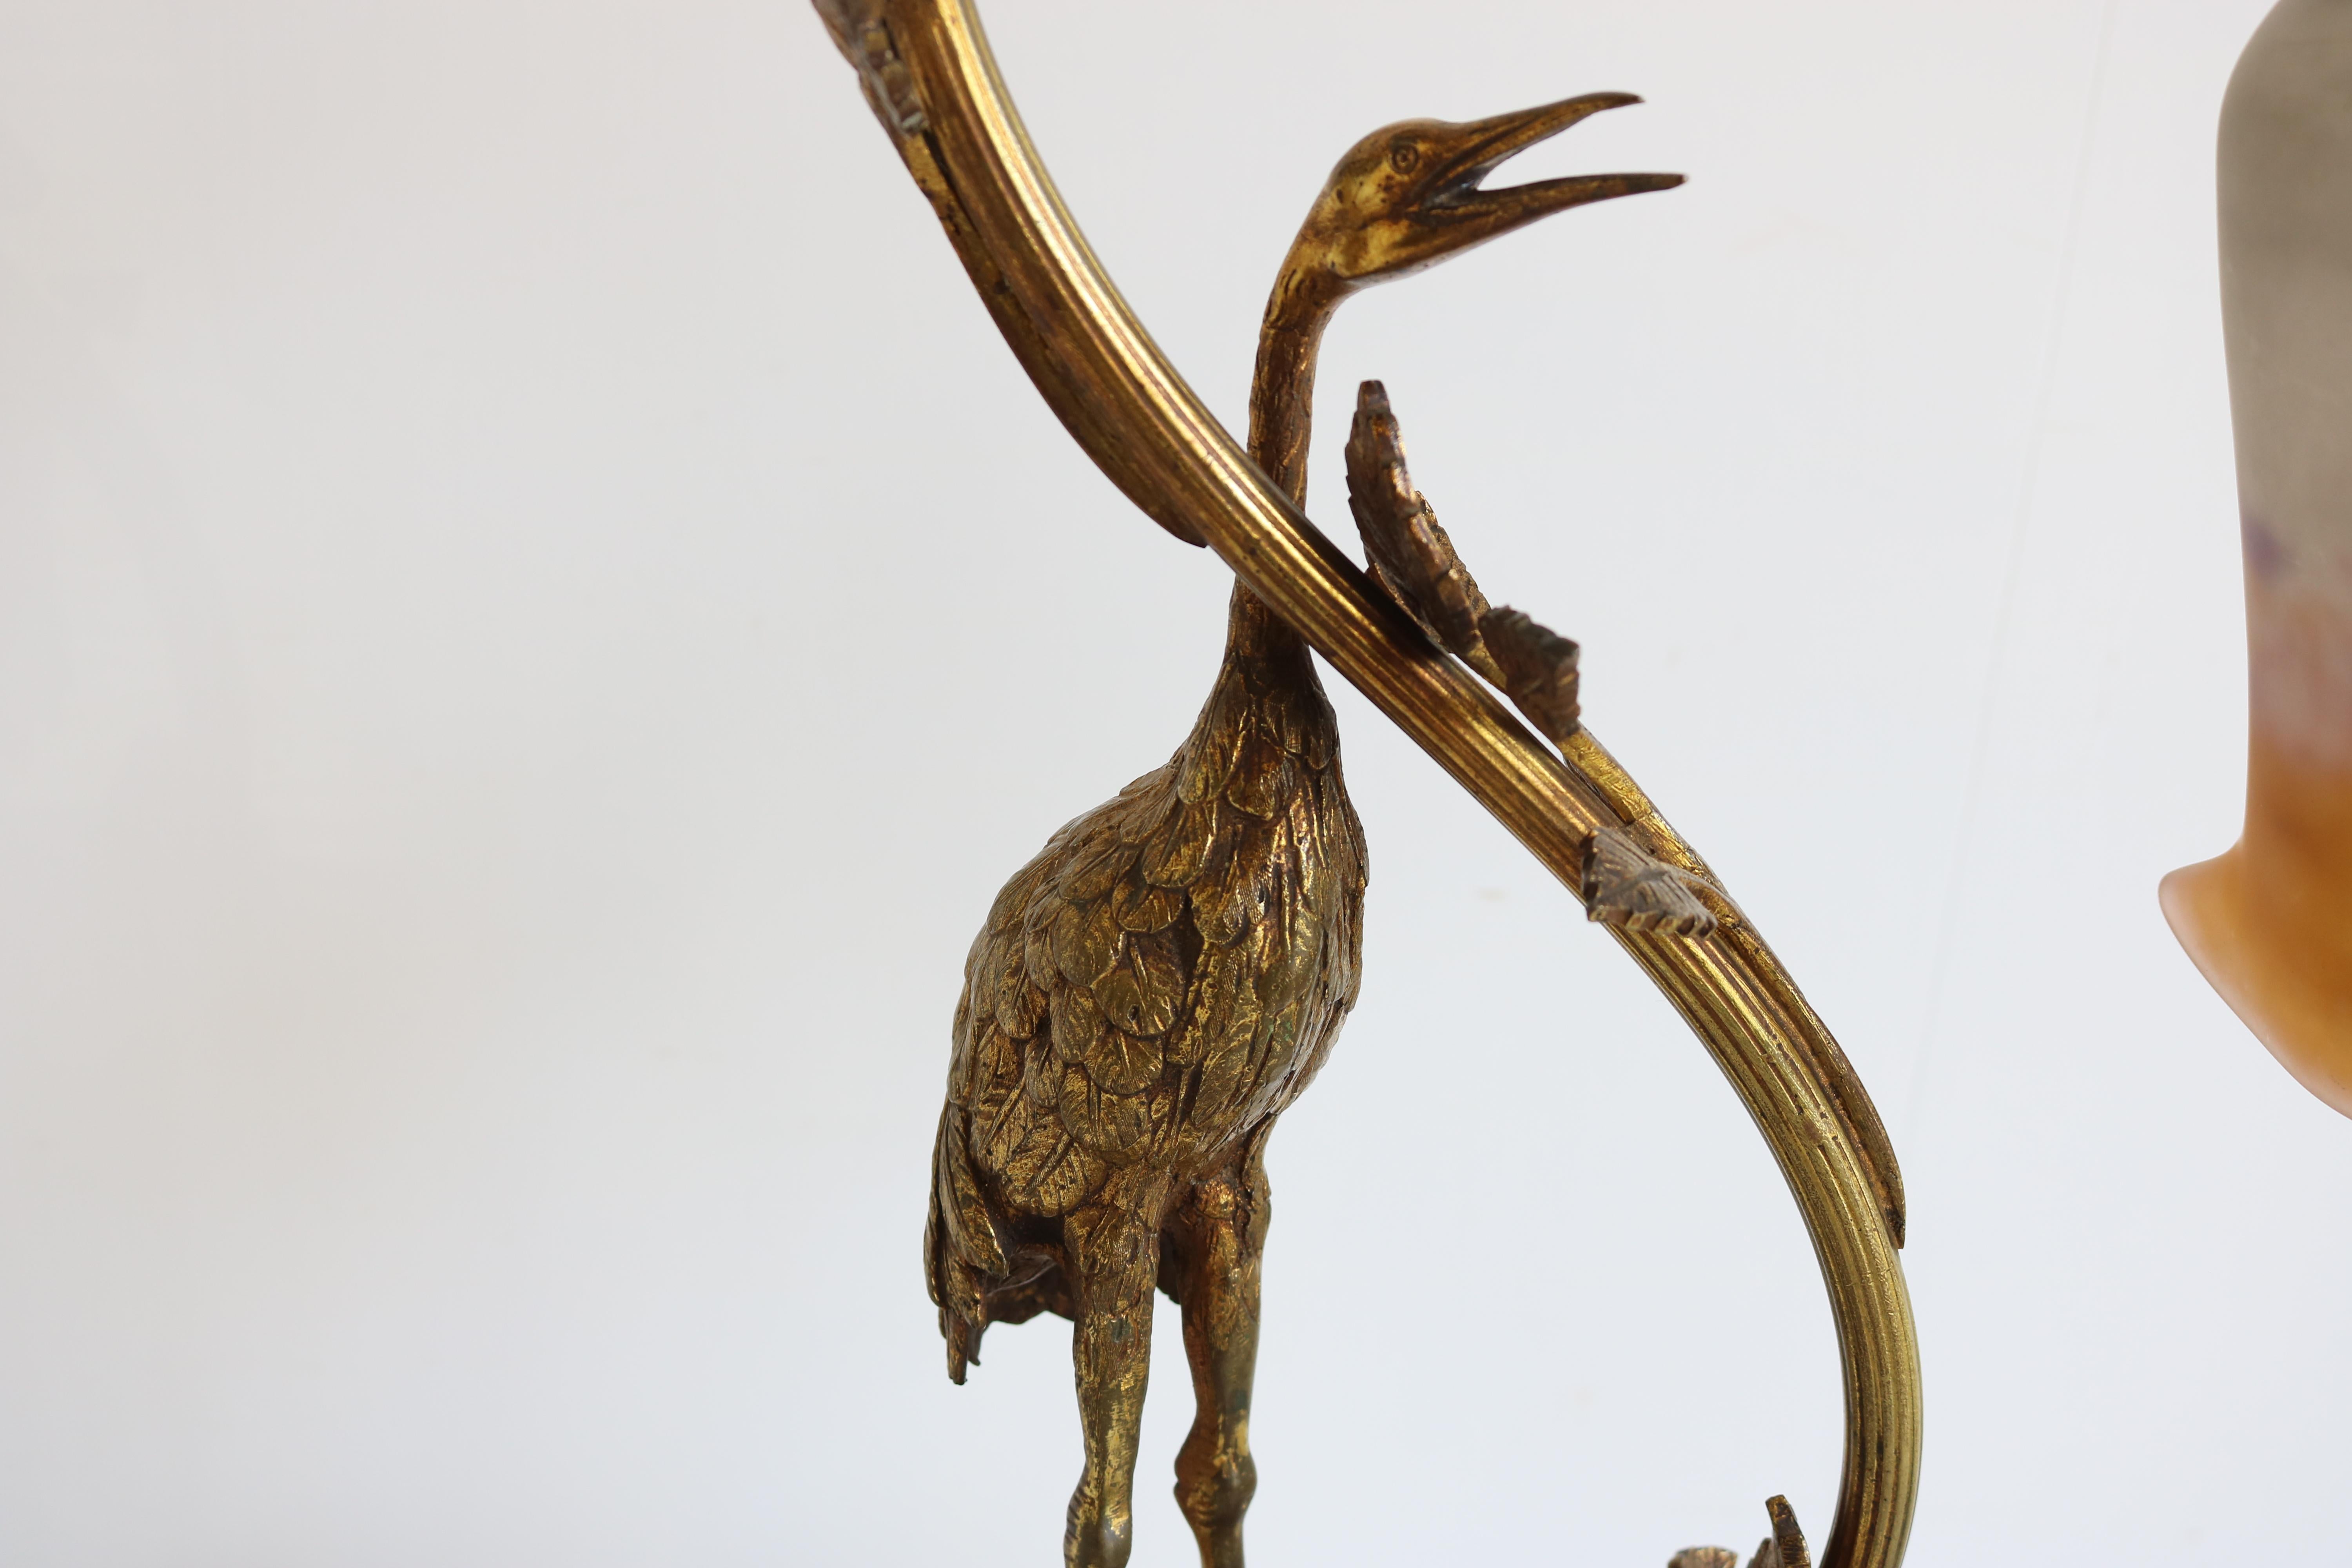 Exquisite Art Nouveau desk lamp rare & early design by David Guéron Degué France 1920. 
Bronze art nouveau frame with a Heron & floral branches / leaves combined with a hand made ''Pate de verre'' art glass shade signed by Degué. 
The shade is